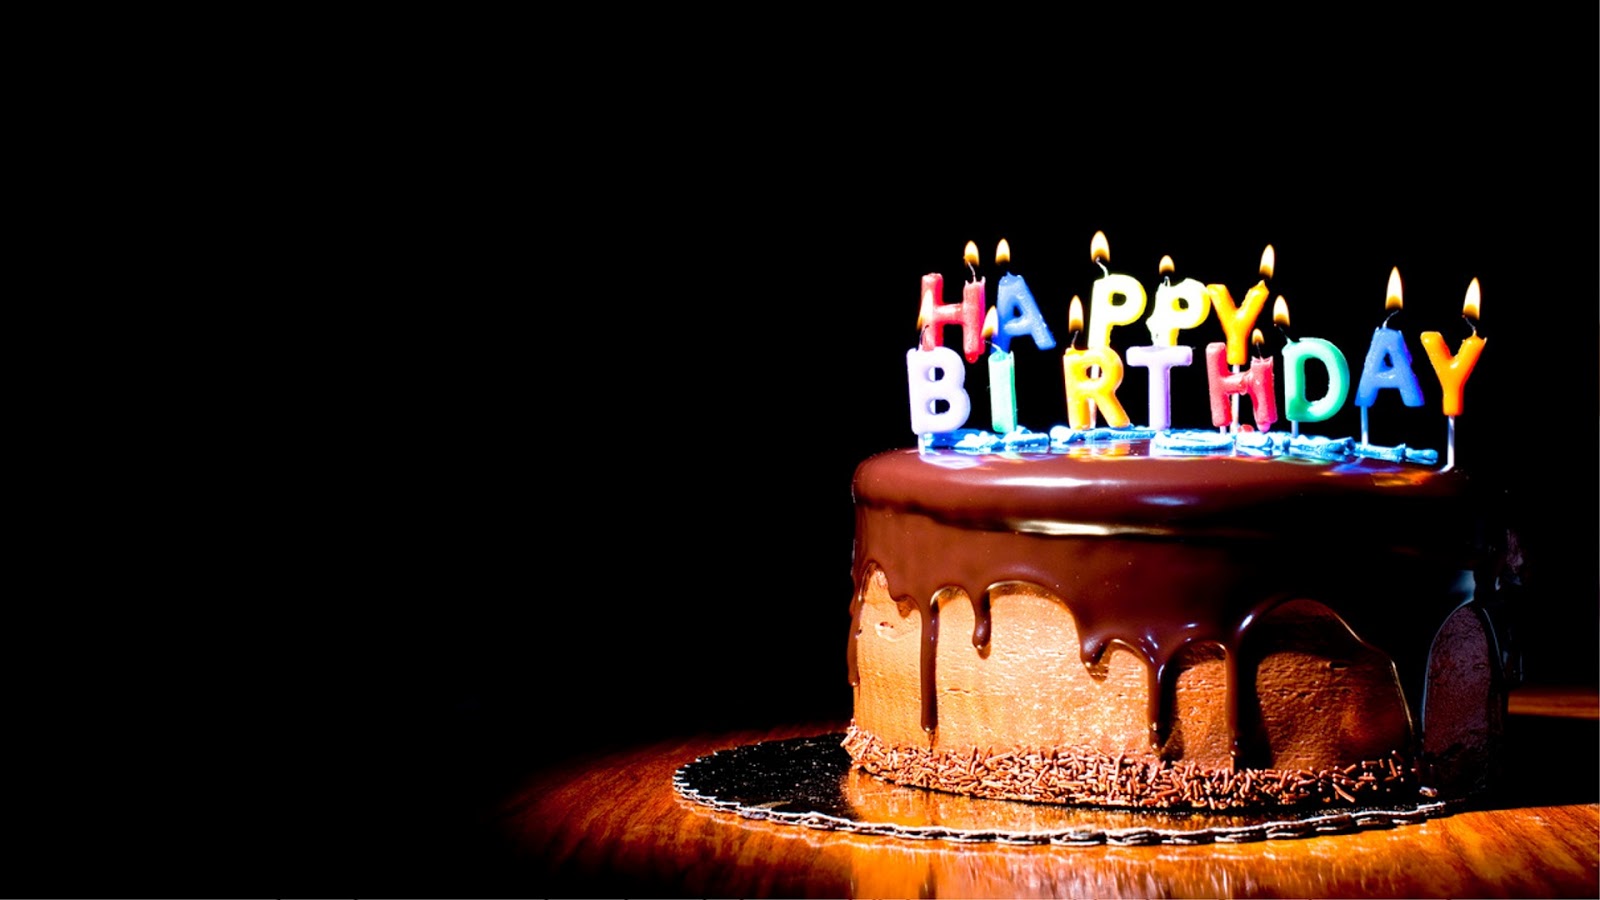 TOP 20 Happy Birthday HD Wallpapers Pictures | Happy Birthday ...